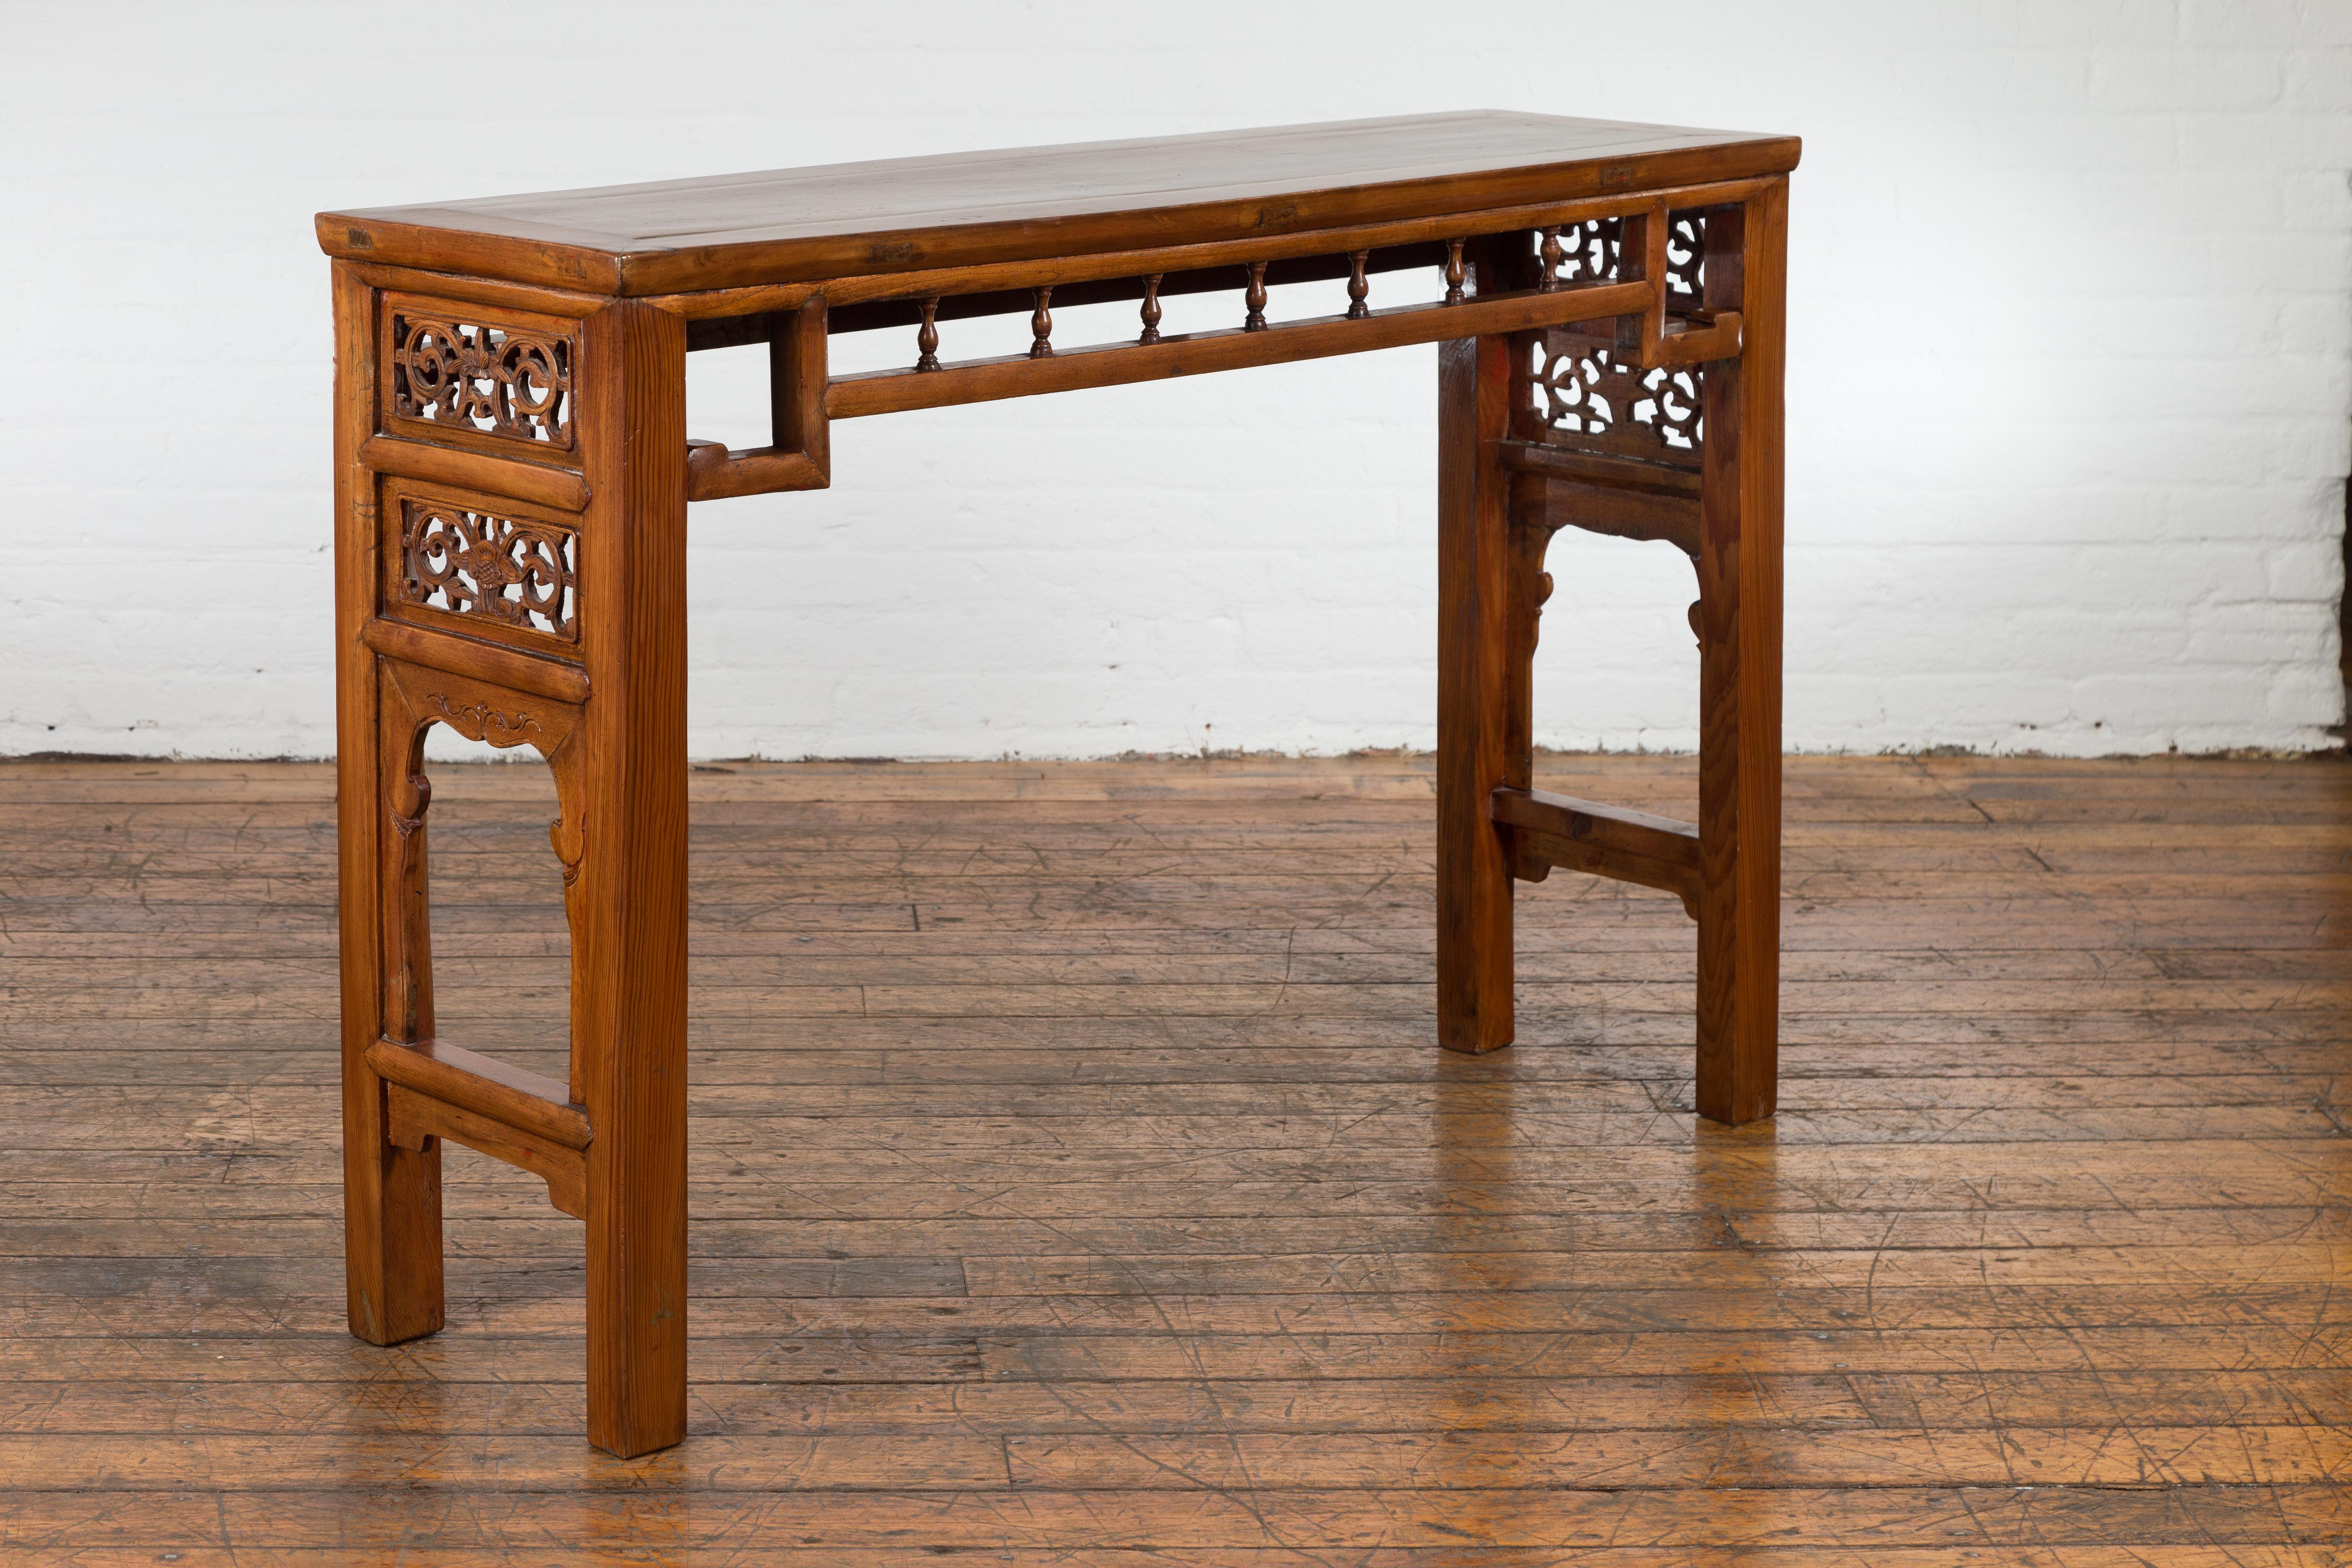 A Chinese late Qing Dynasty period altar brown lacquered console table from the early 20th century with scrolling foliage-carved side panels, humpback stretchers, petite turned baluster motifs on the apron, newly and professionally refreshed. This